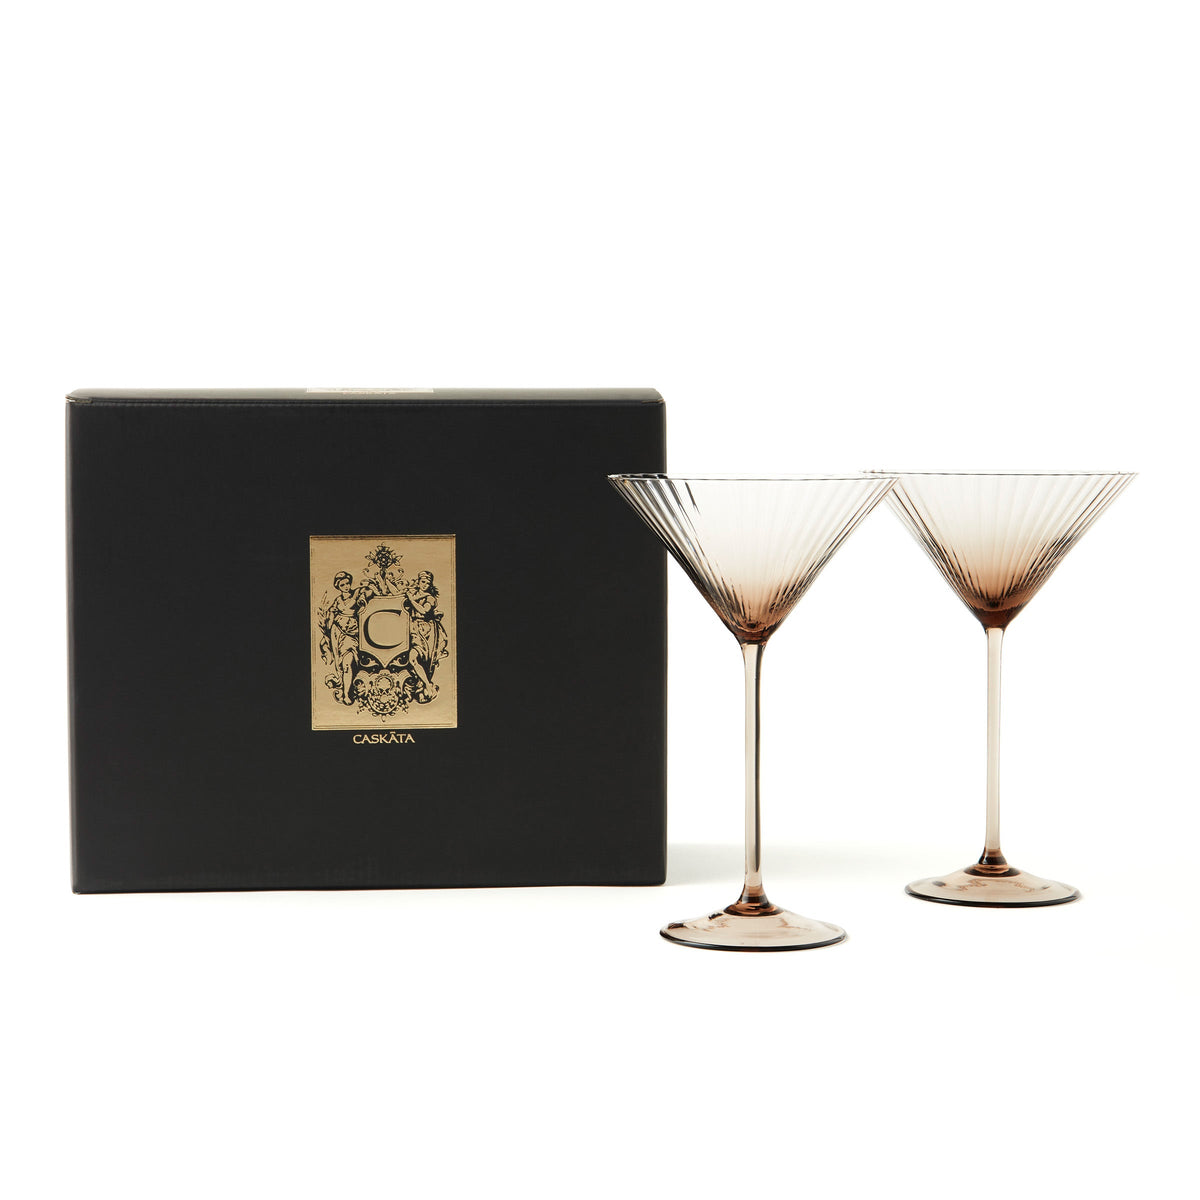 Quinn Mocha Martini Glasses are beautifully packaged in a black with gold emblemed gift box.